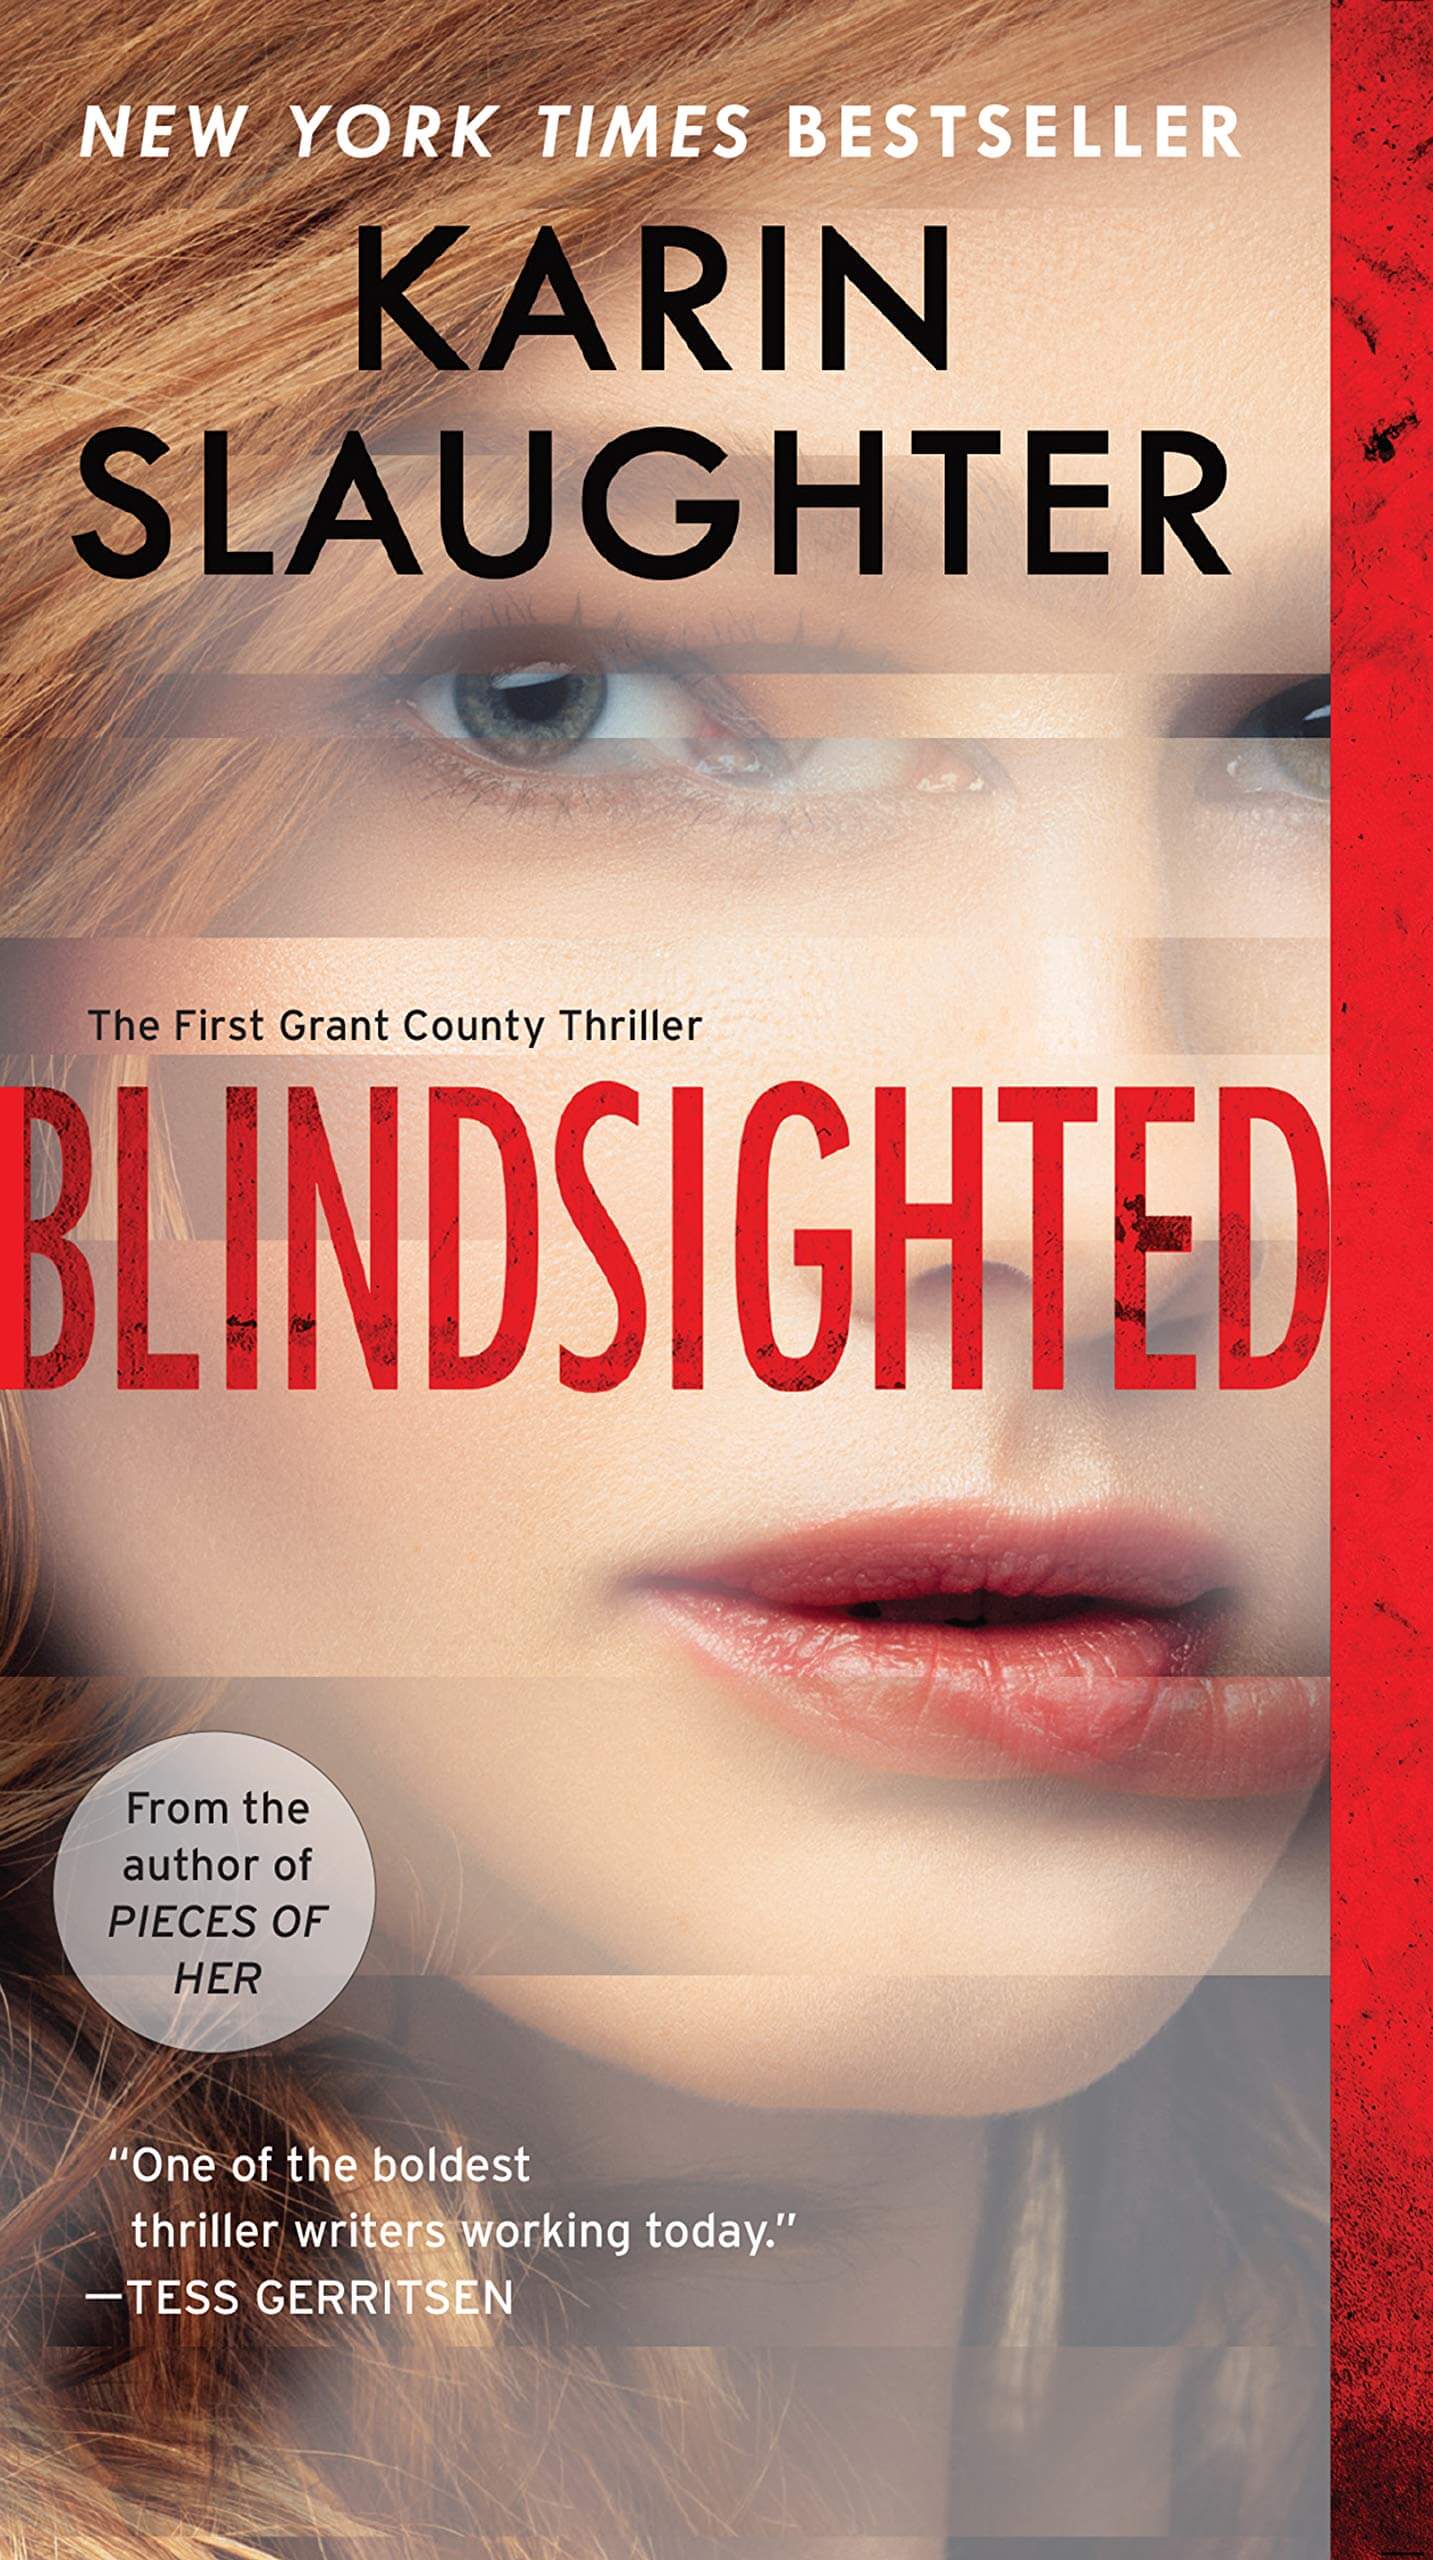 Cover of Blindsighted by Karin Slaughter